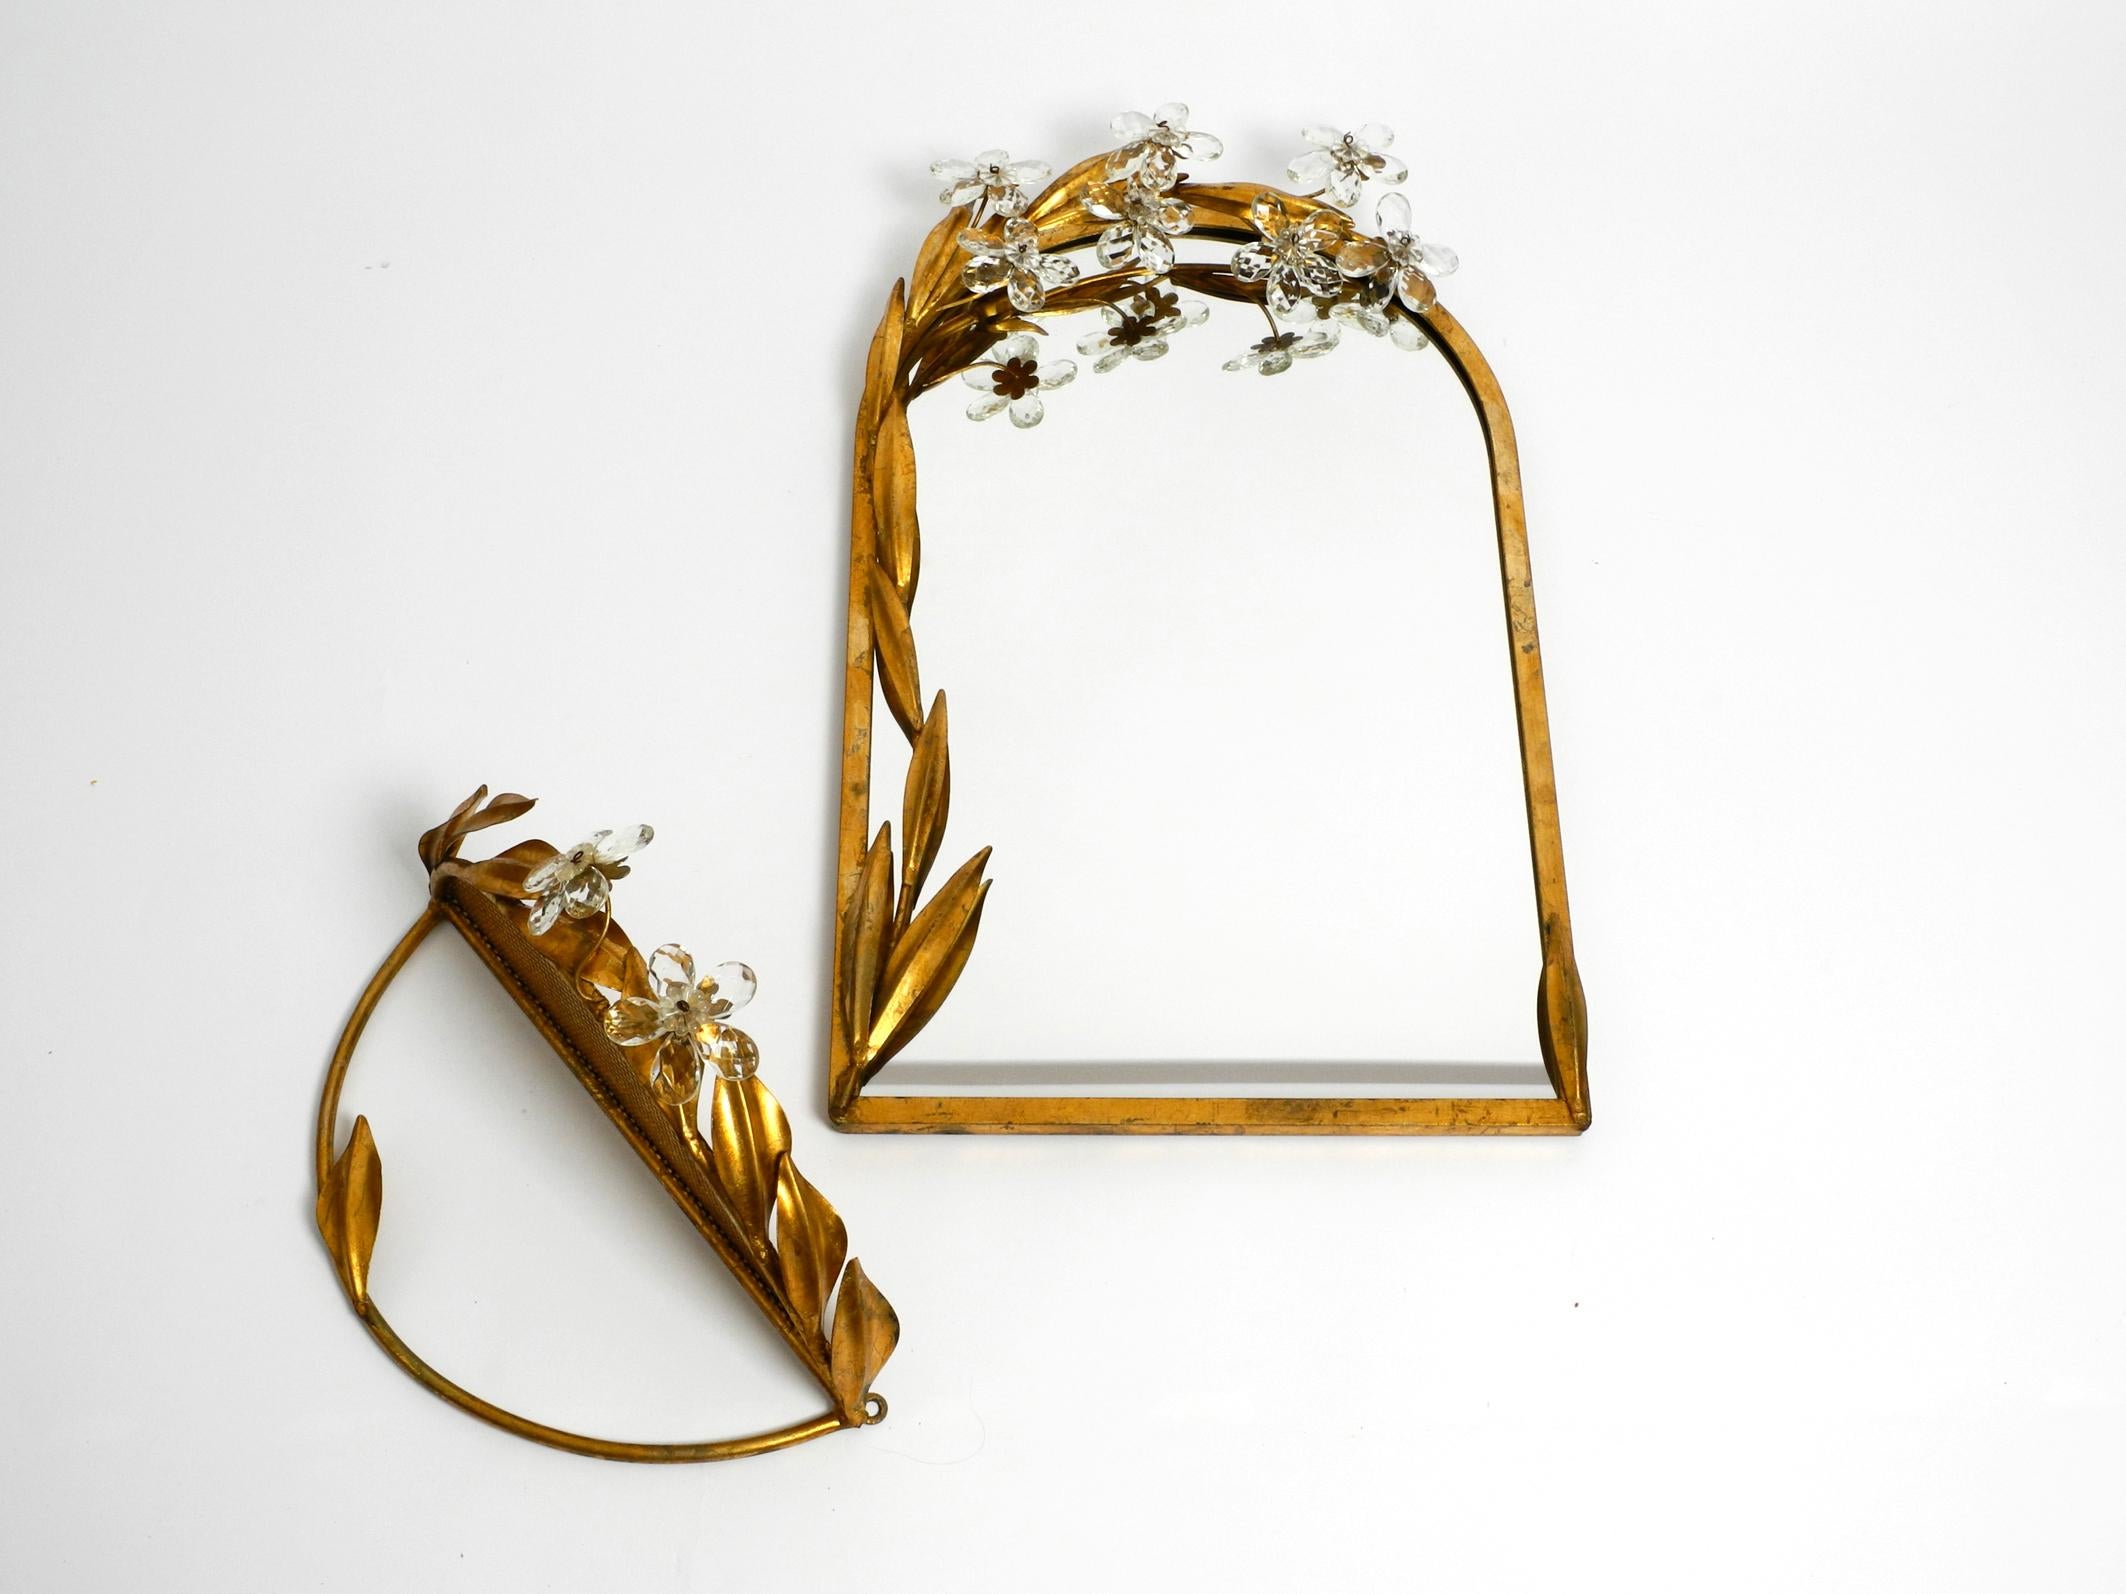 Italian Set of a Floral Iron Wall Mirror and Matching Shelf Gold Plated by Banci Firenze For Sale